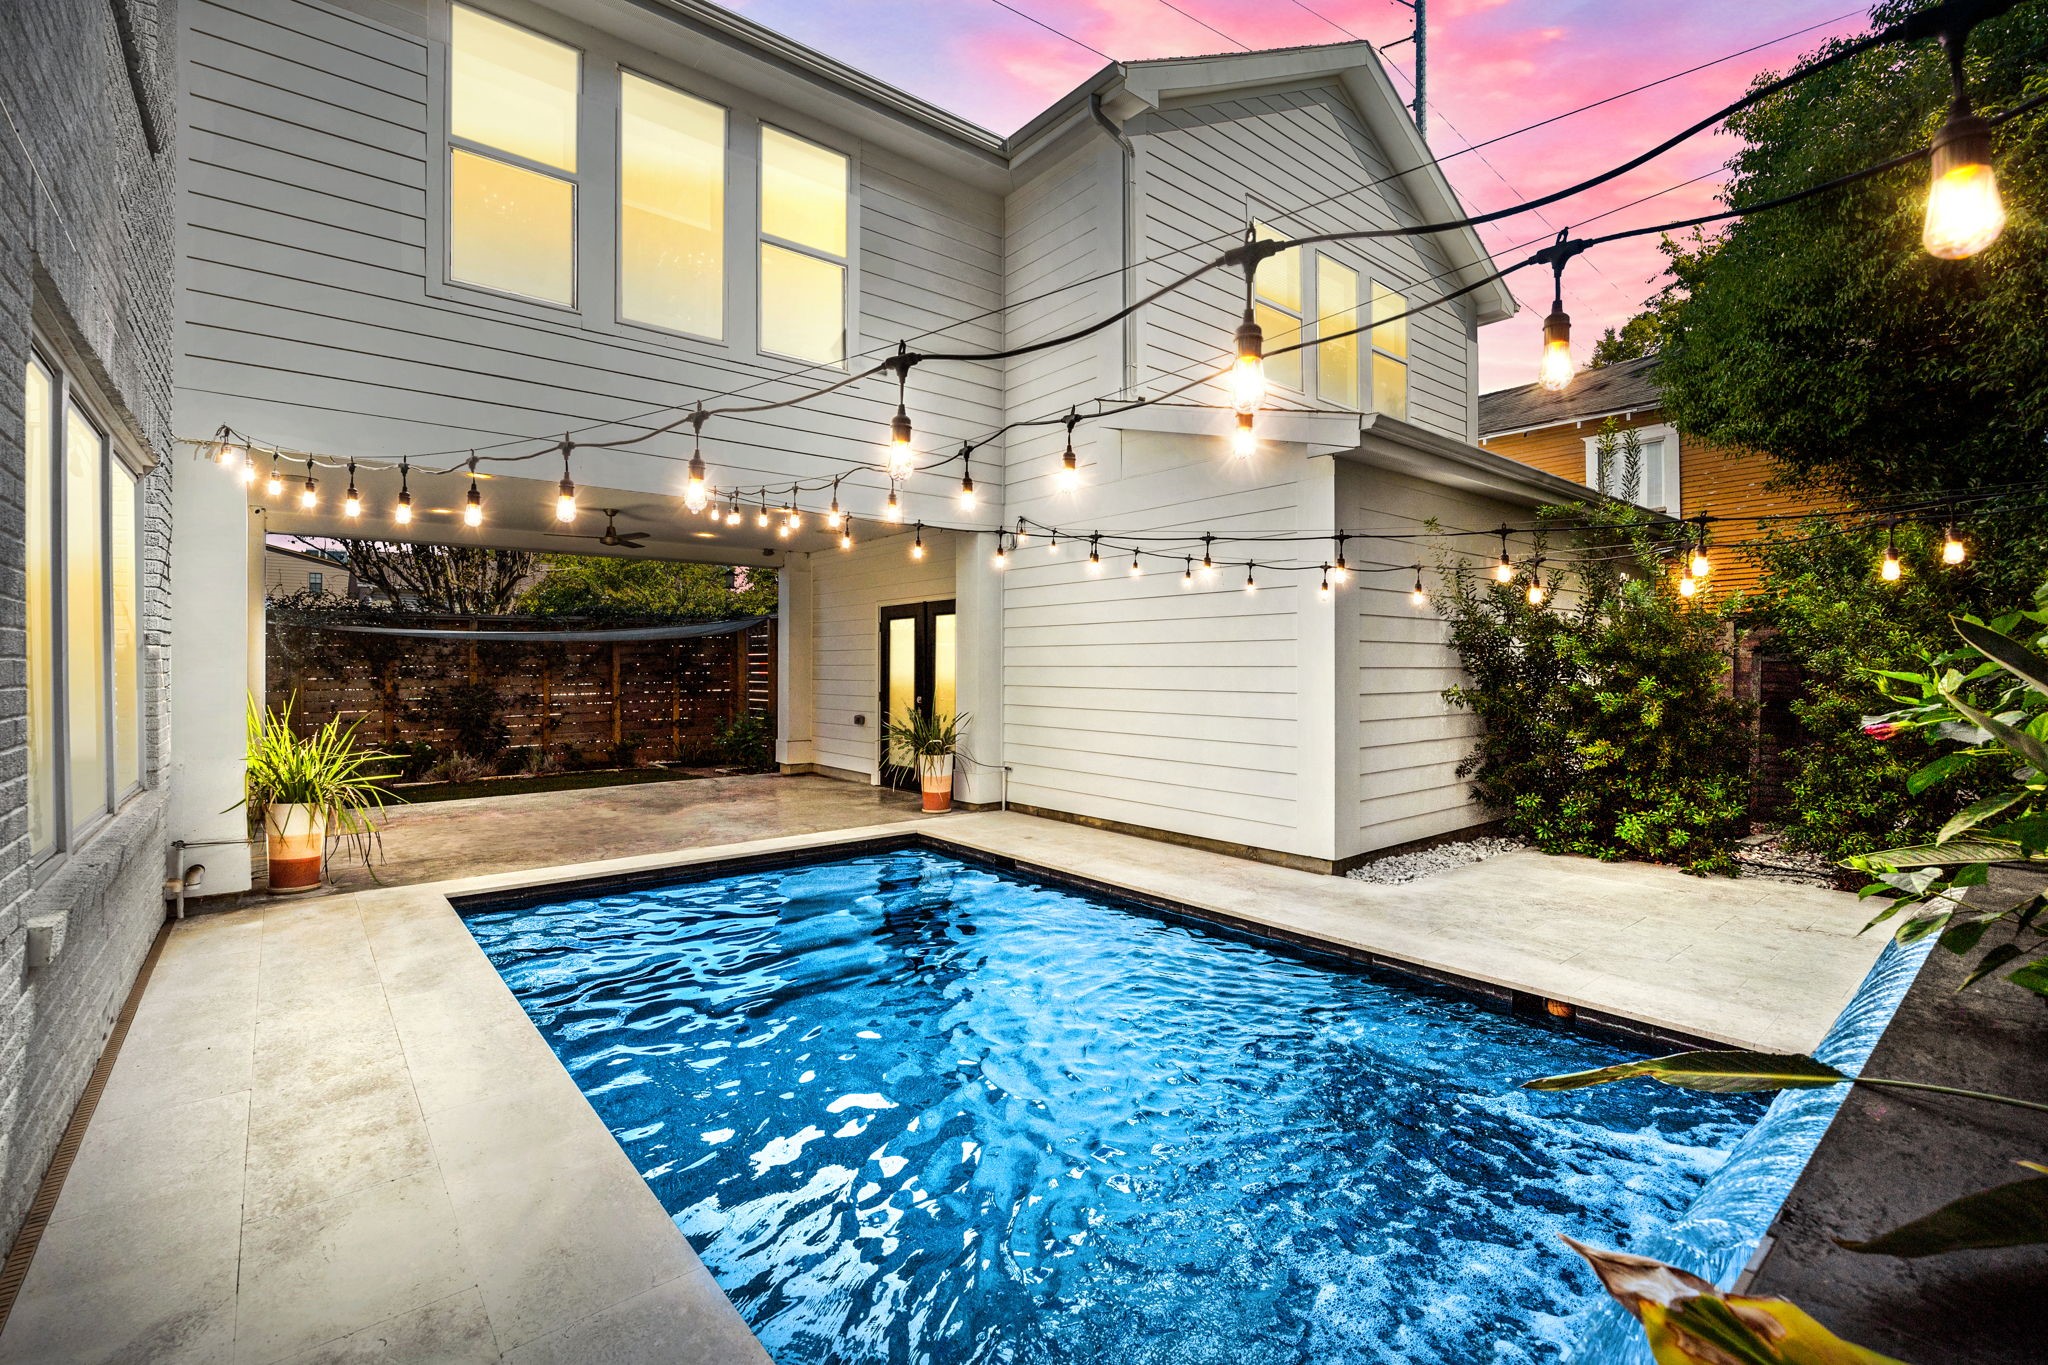 Stunning custom pool with a heater AND a chiller to stay cool all summer.